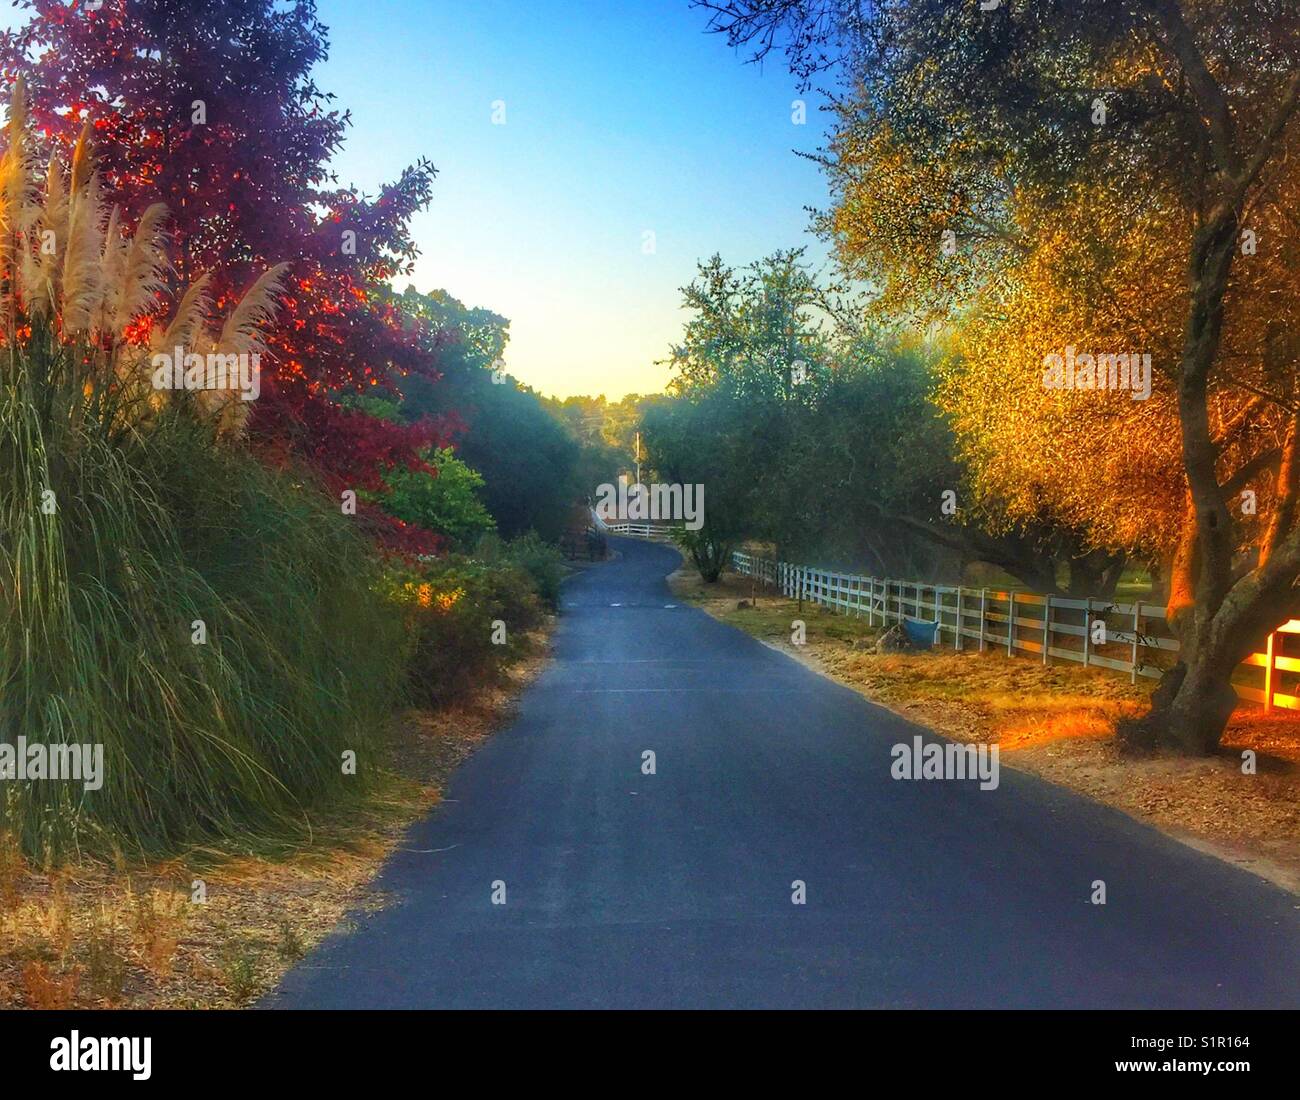 Early morning walk on a country road enjoying fall trees and leaves changing colors Stock Photo